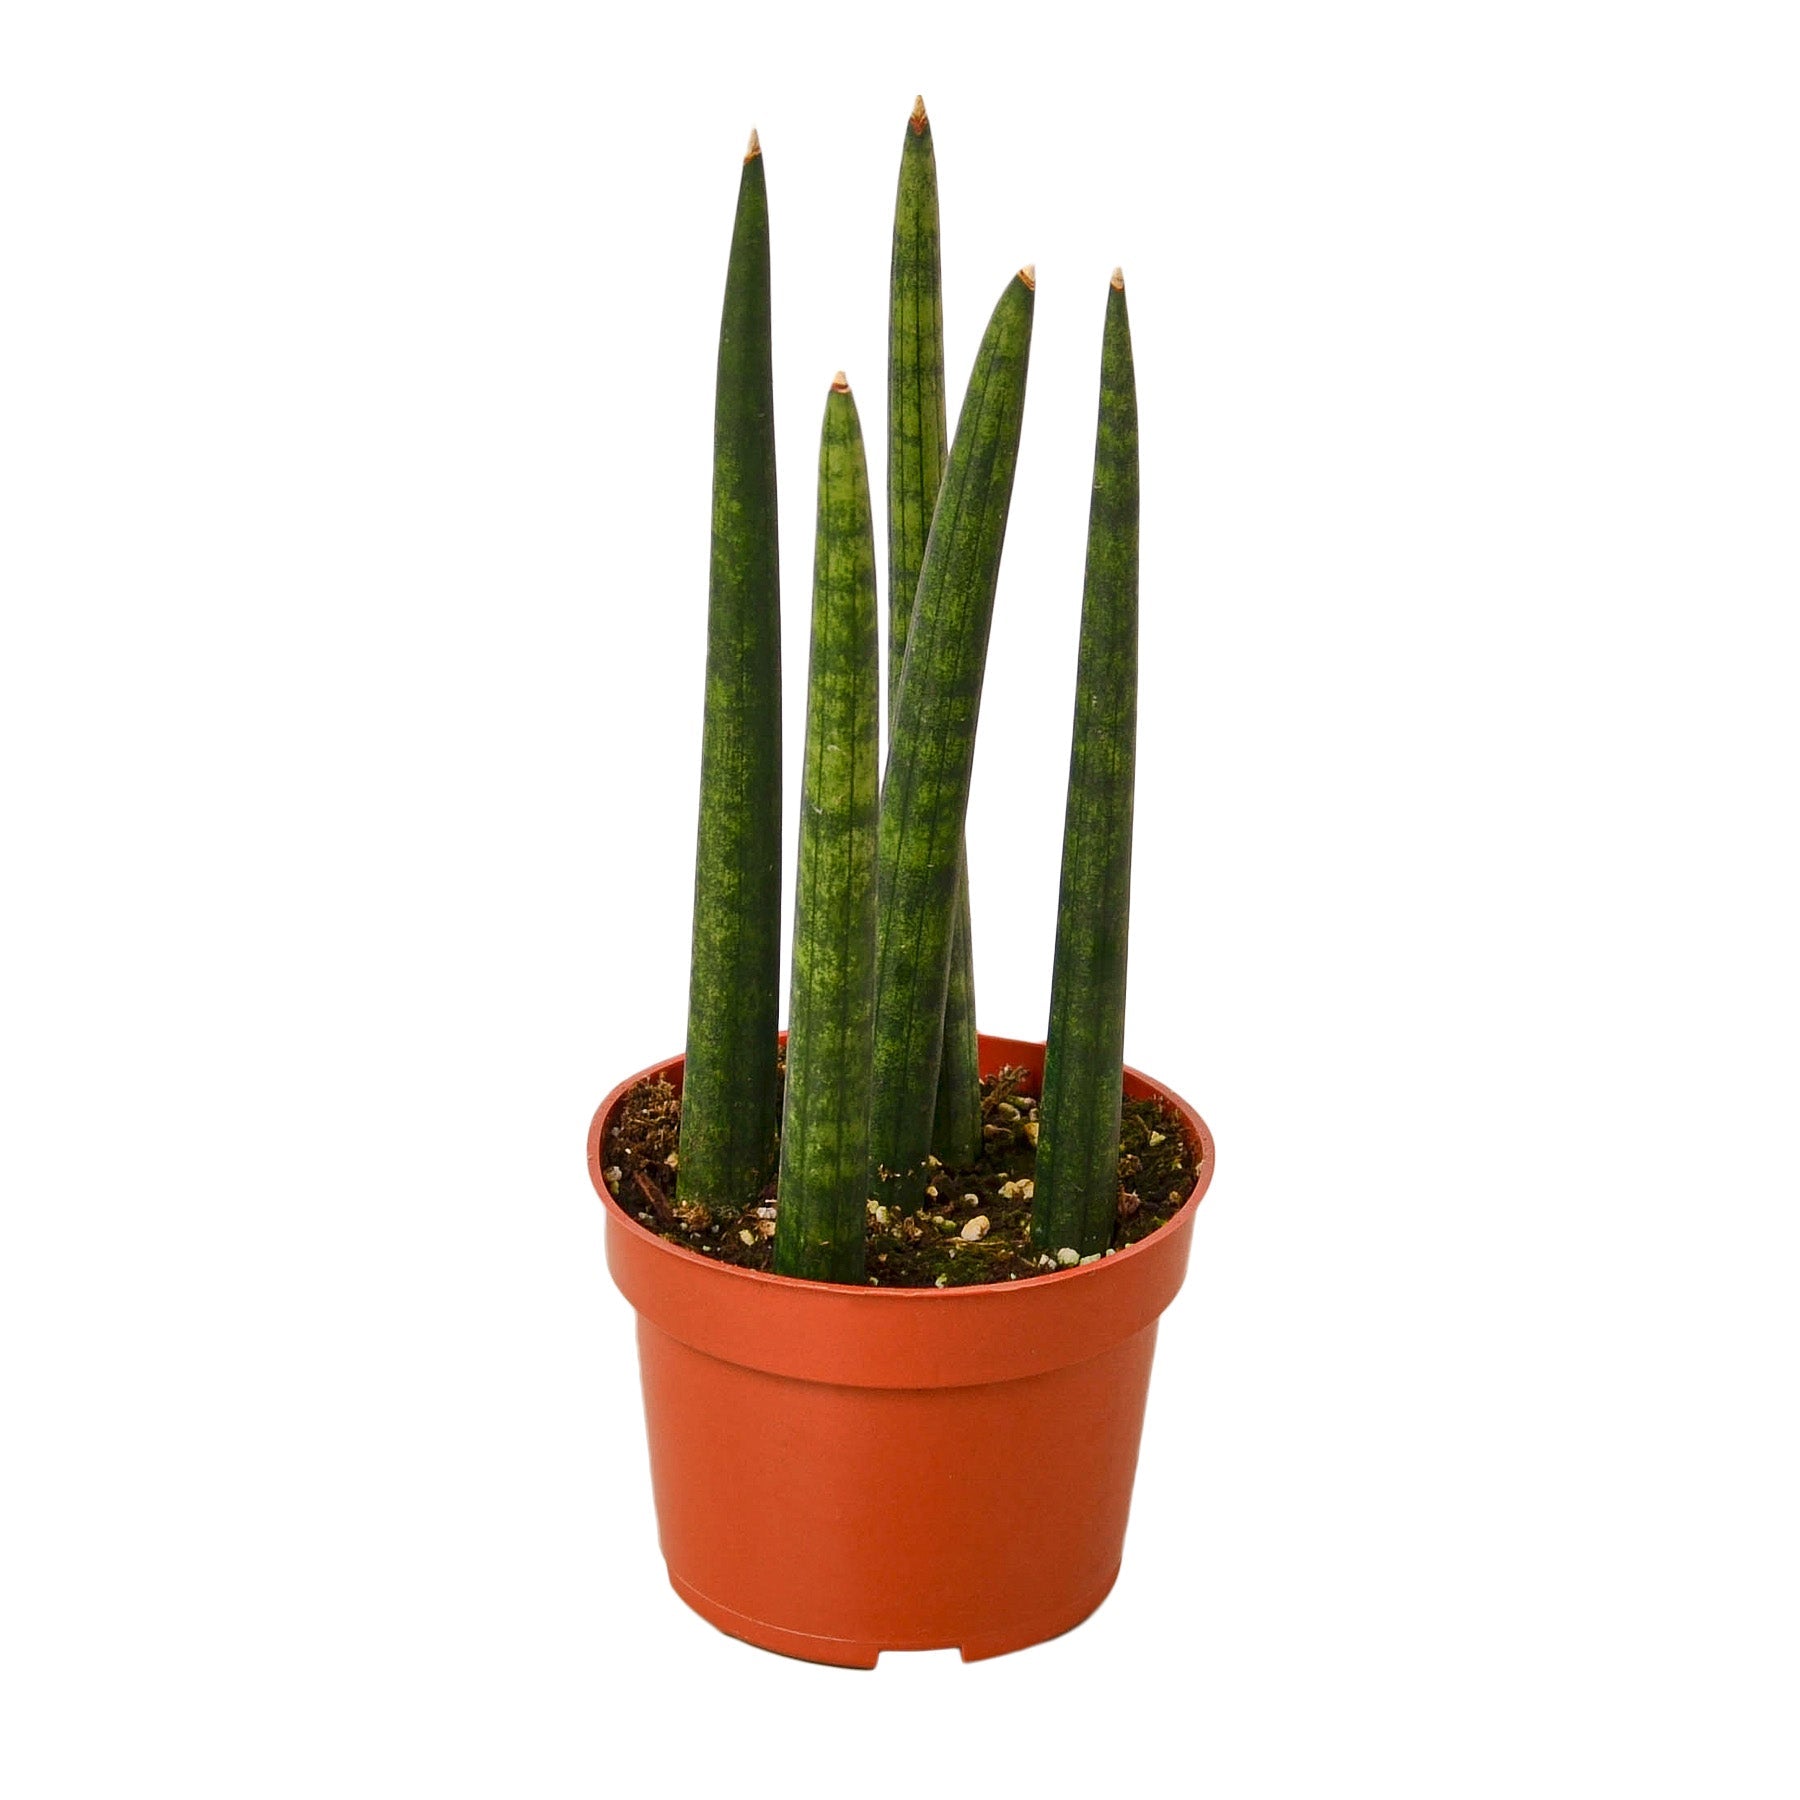 A snake plant in a red pot on a white background.